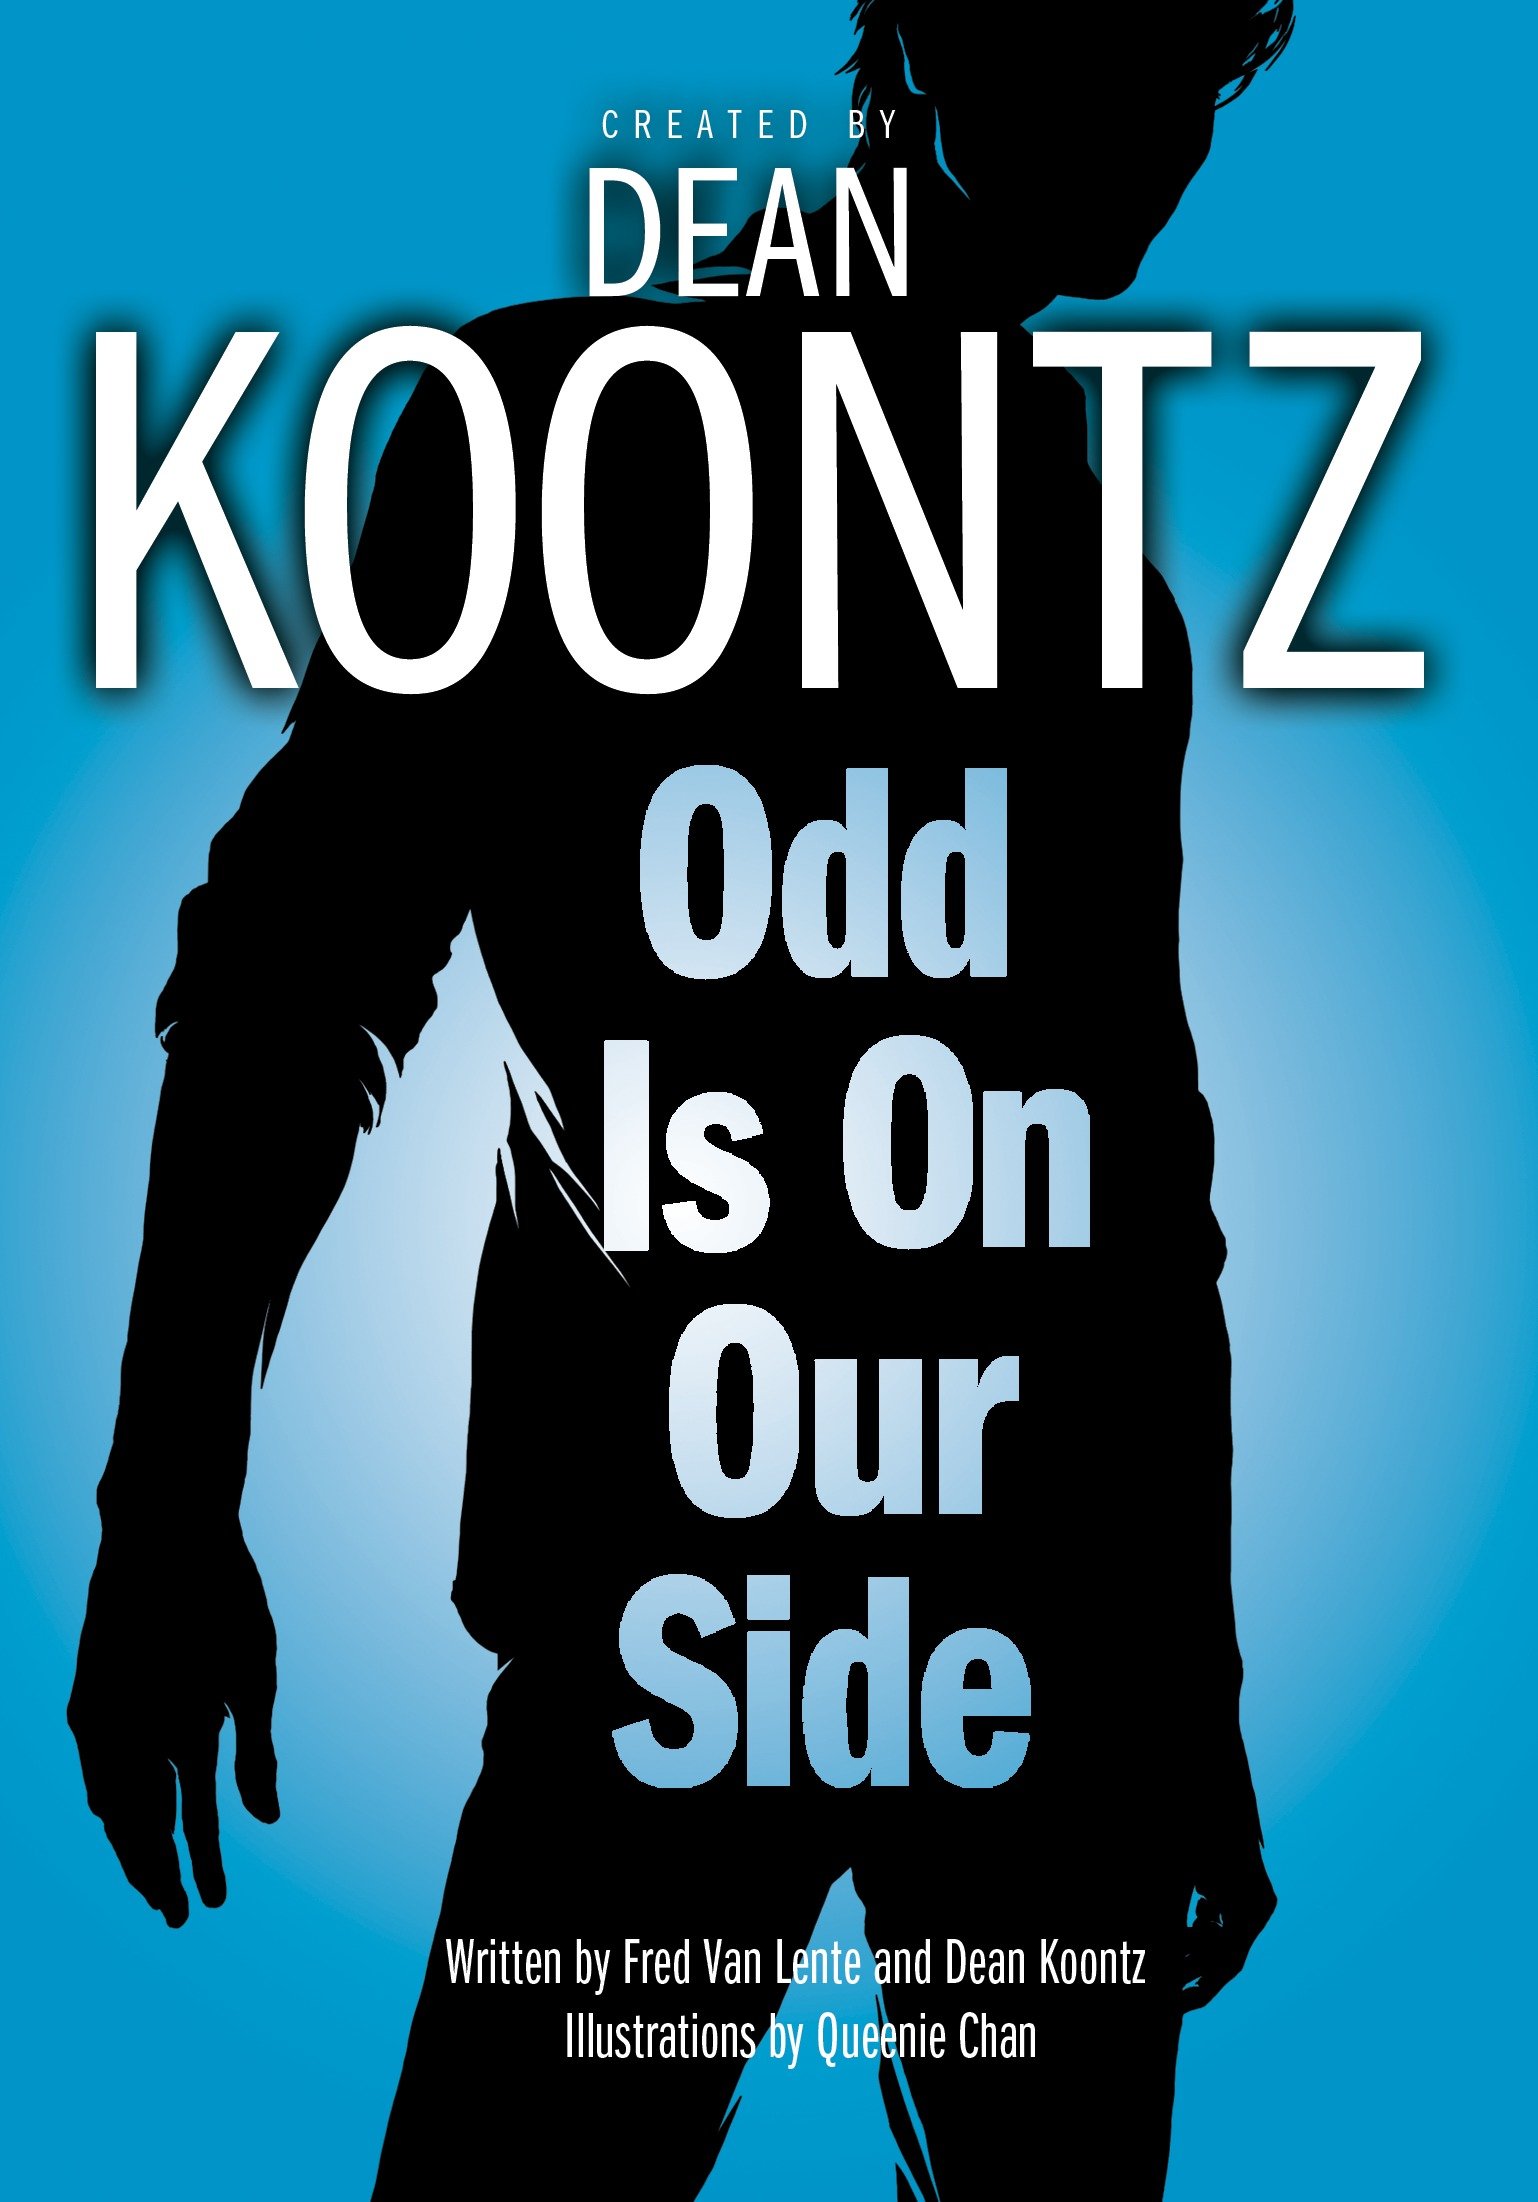 Odd Is on Our Side (Graphic Novel) (Odd Thomas Graphic Novels Book 2)